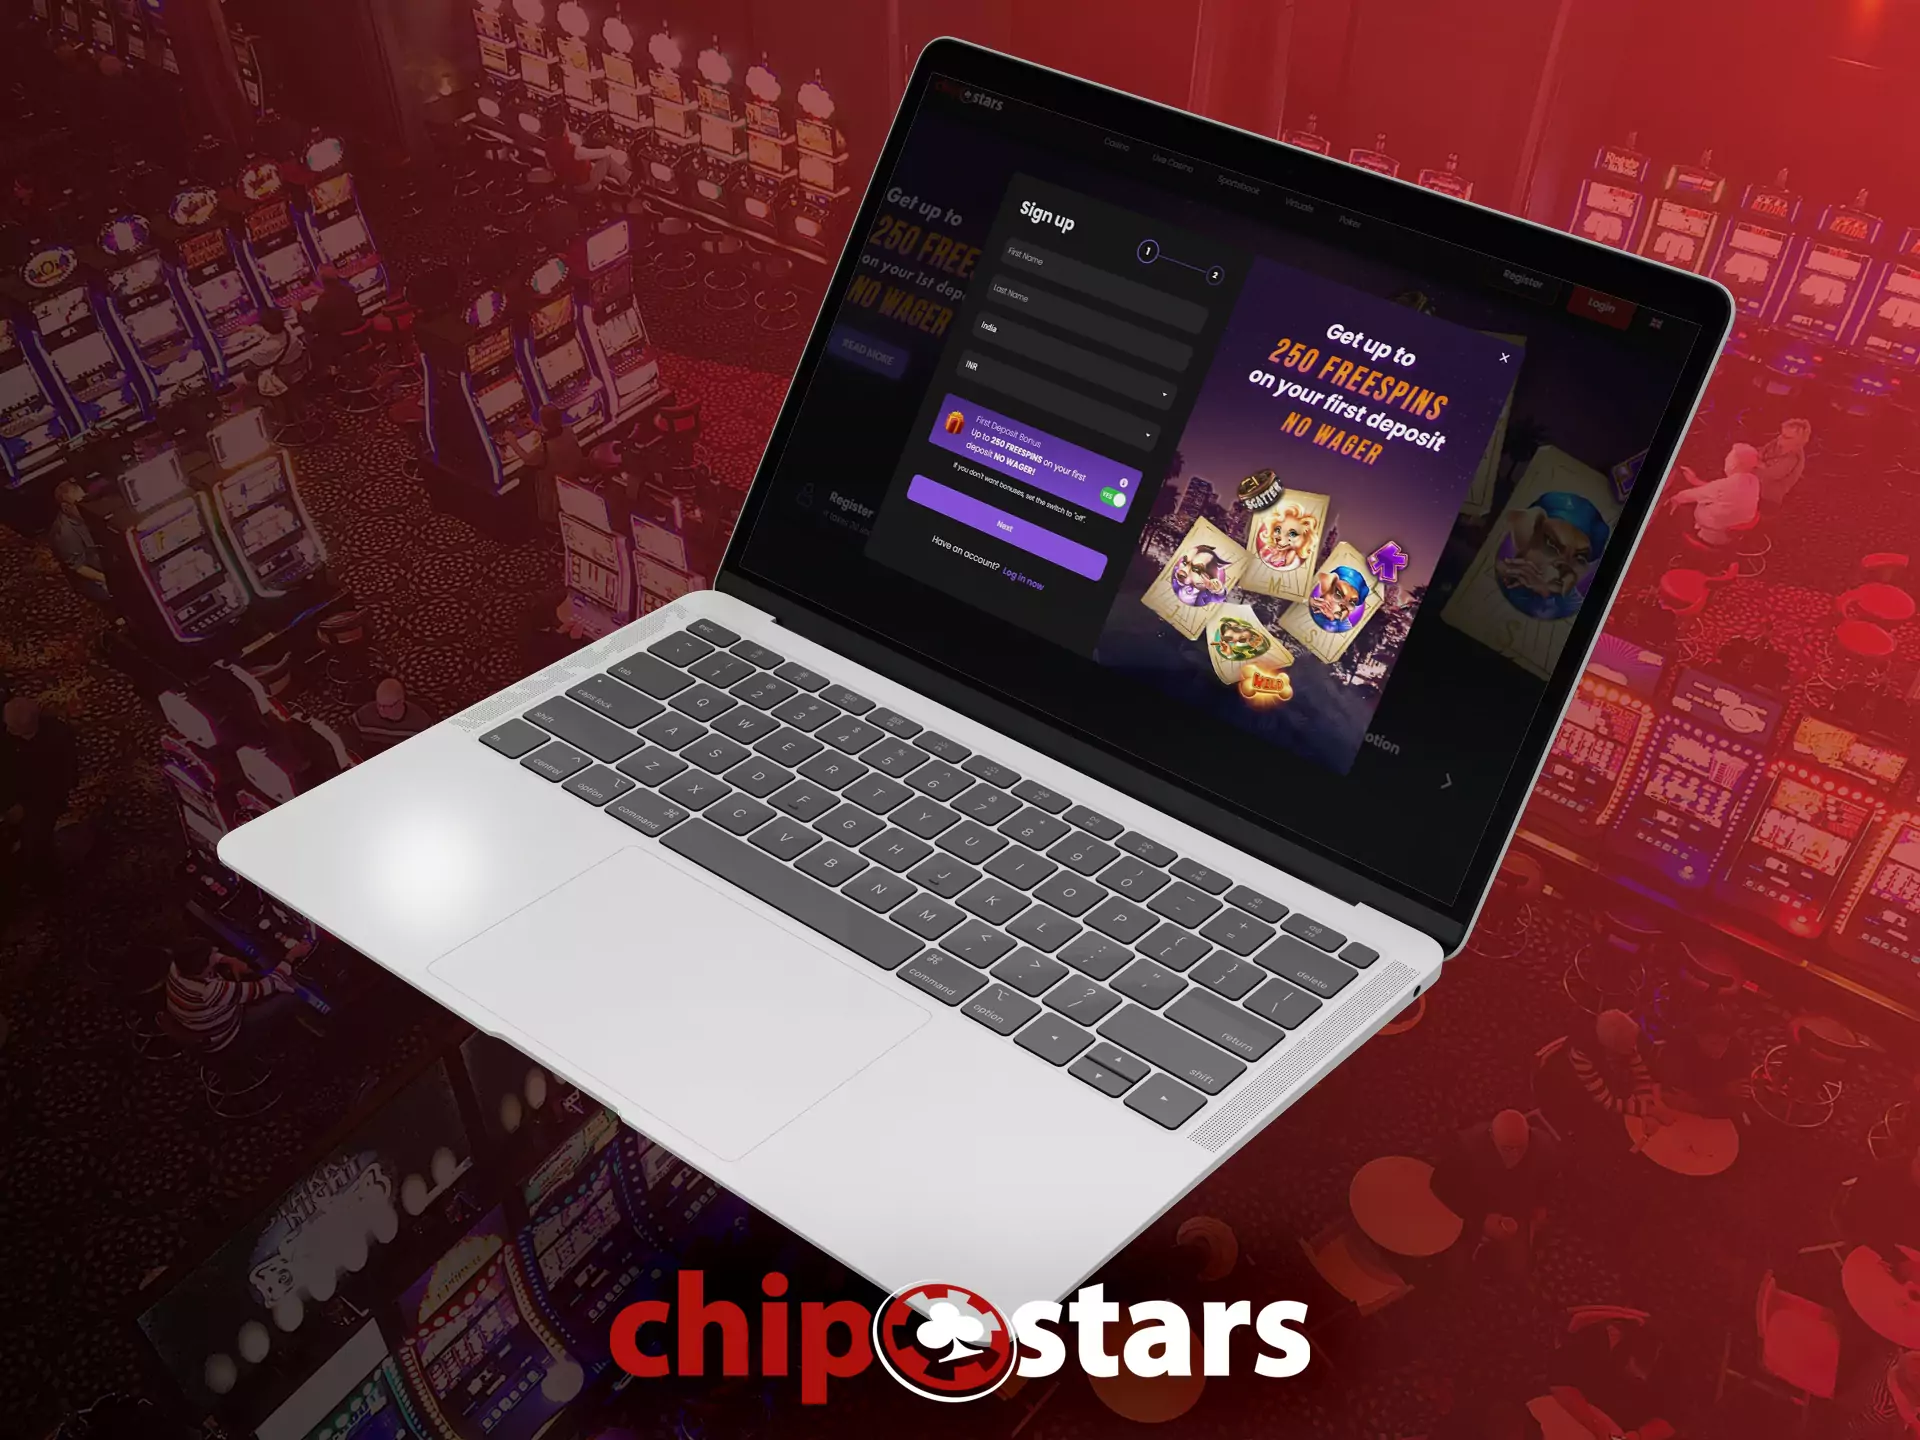 Create a username and a password and confirm registration on Chipstars.